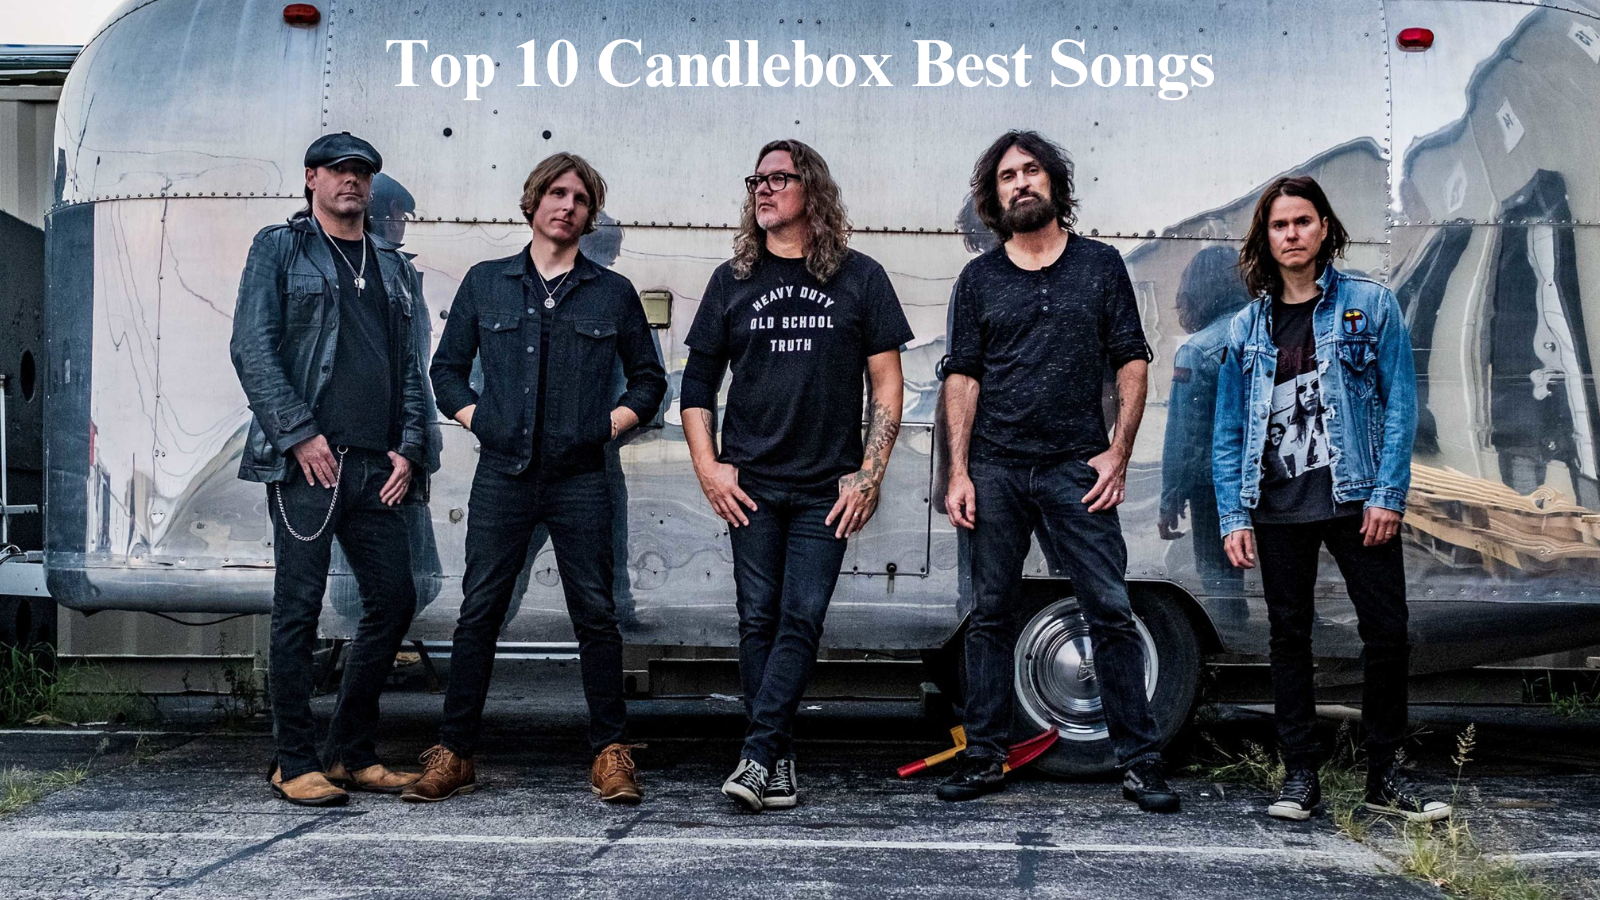 Top 10 Candlebox Best Songs